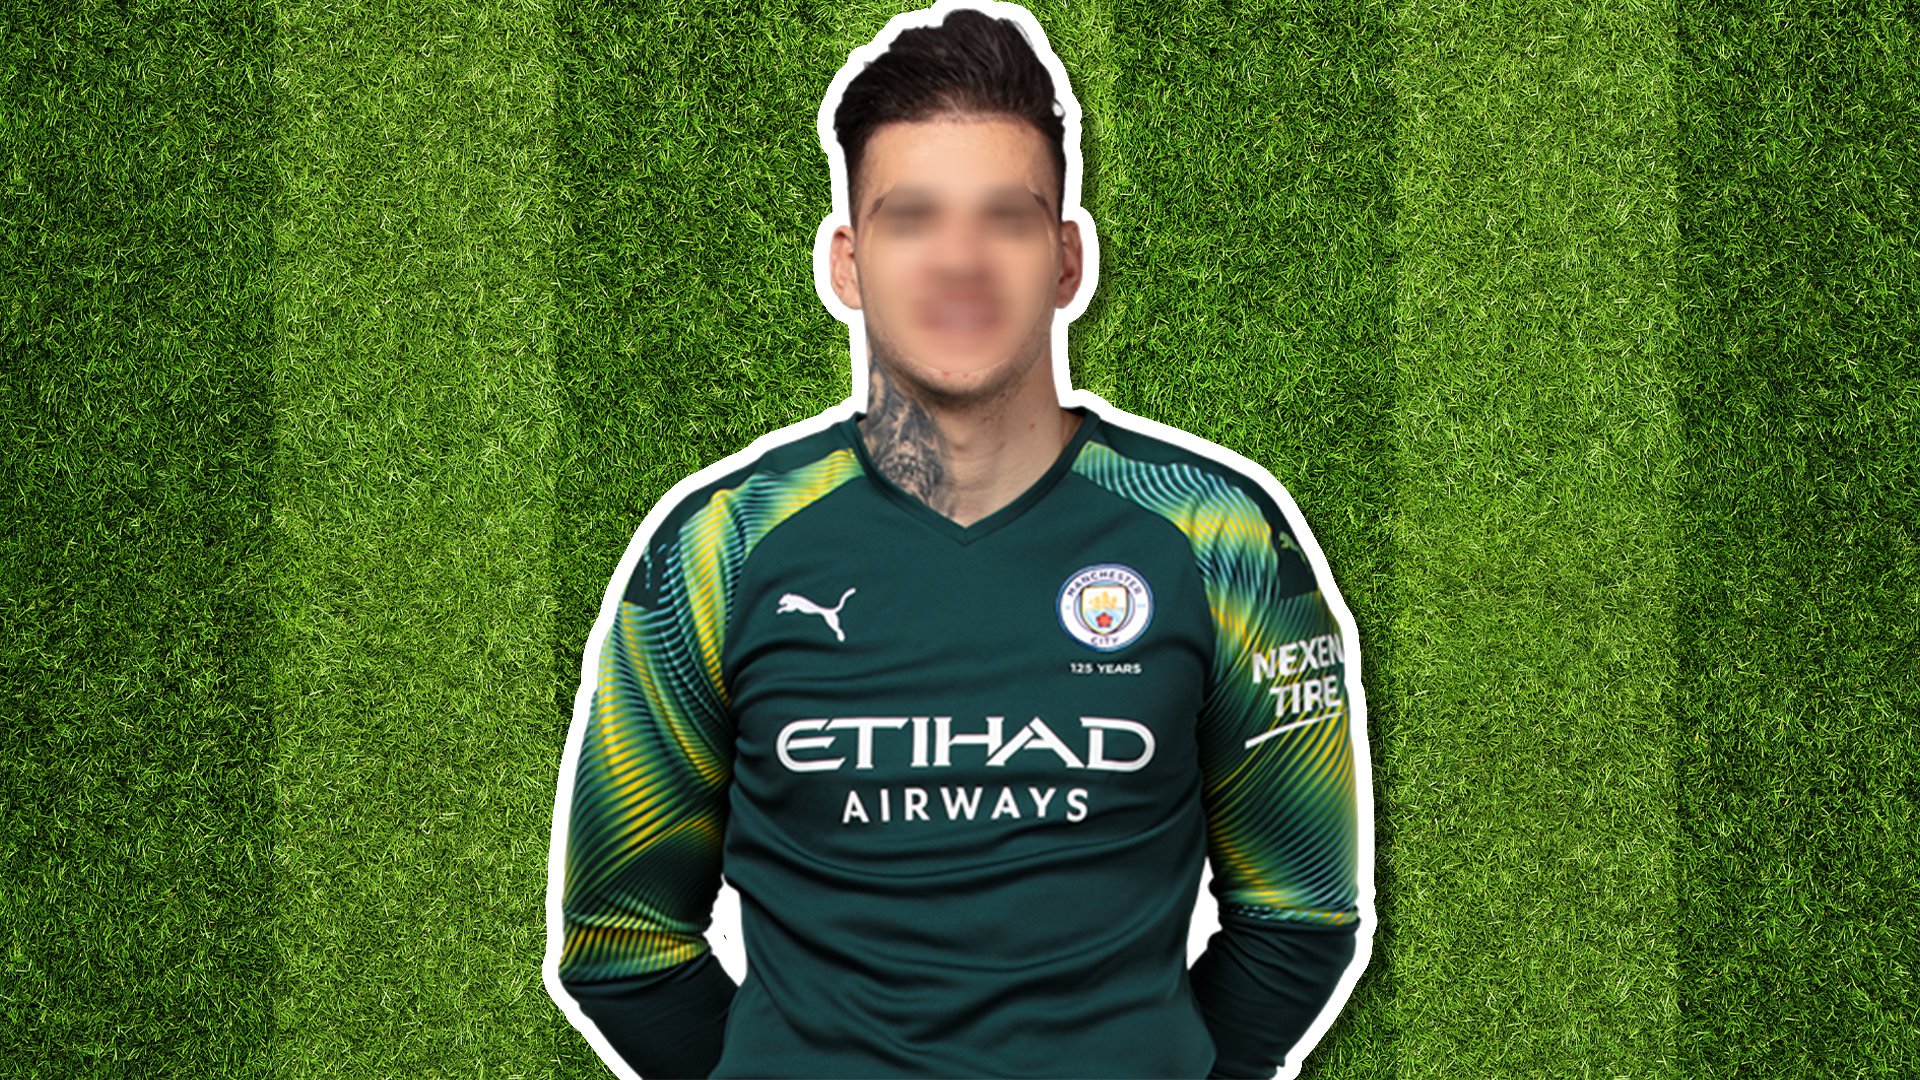 Manchester City player